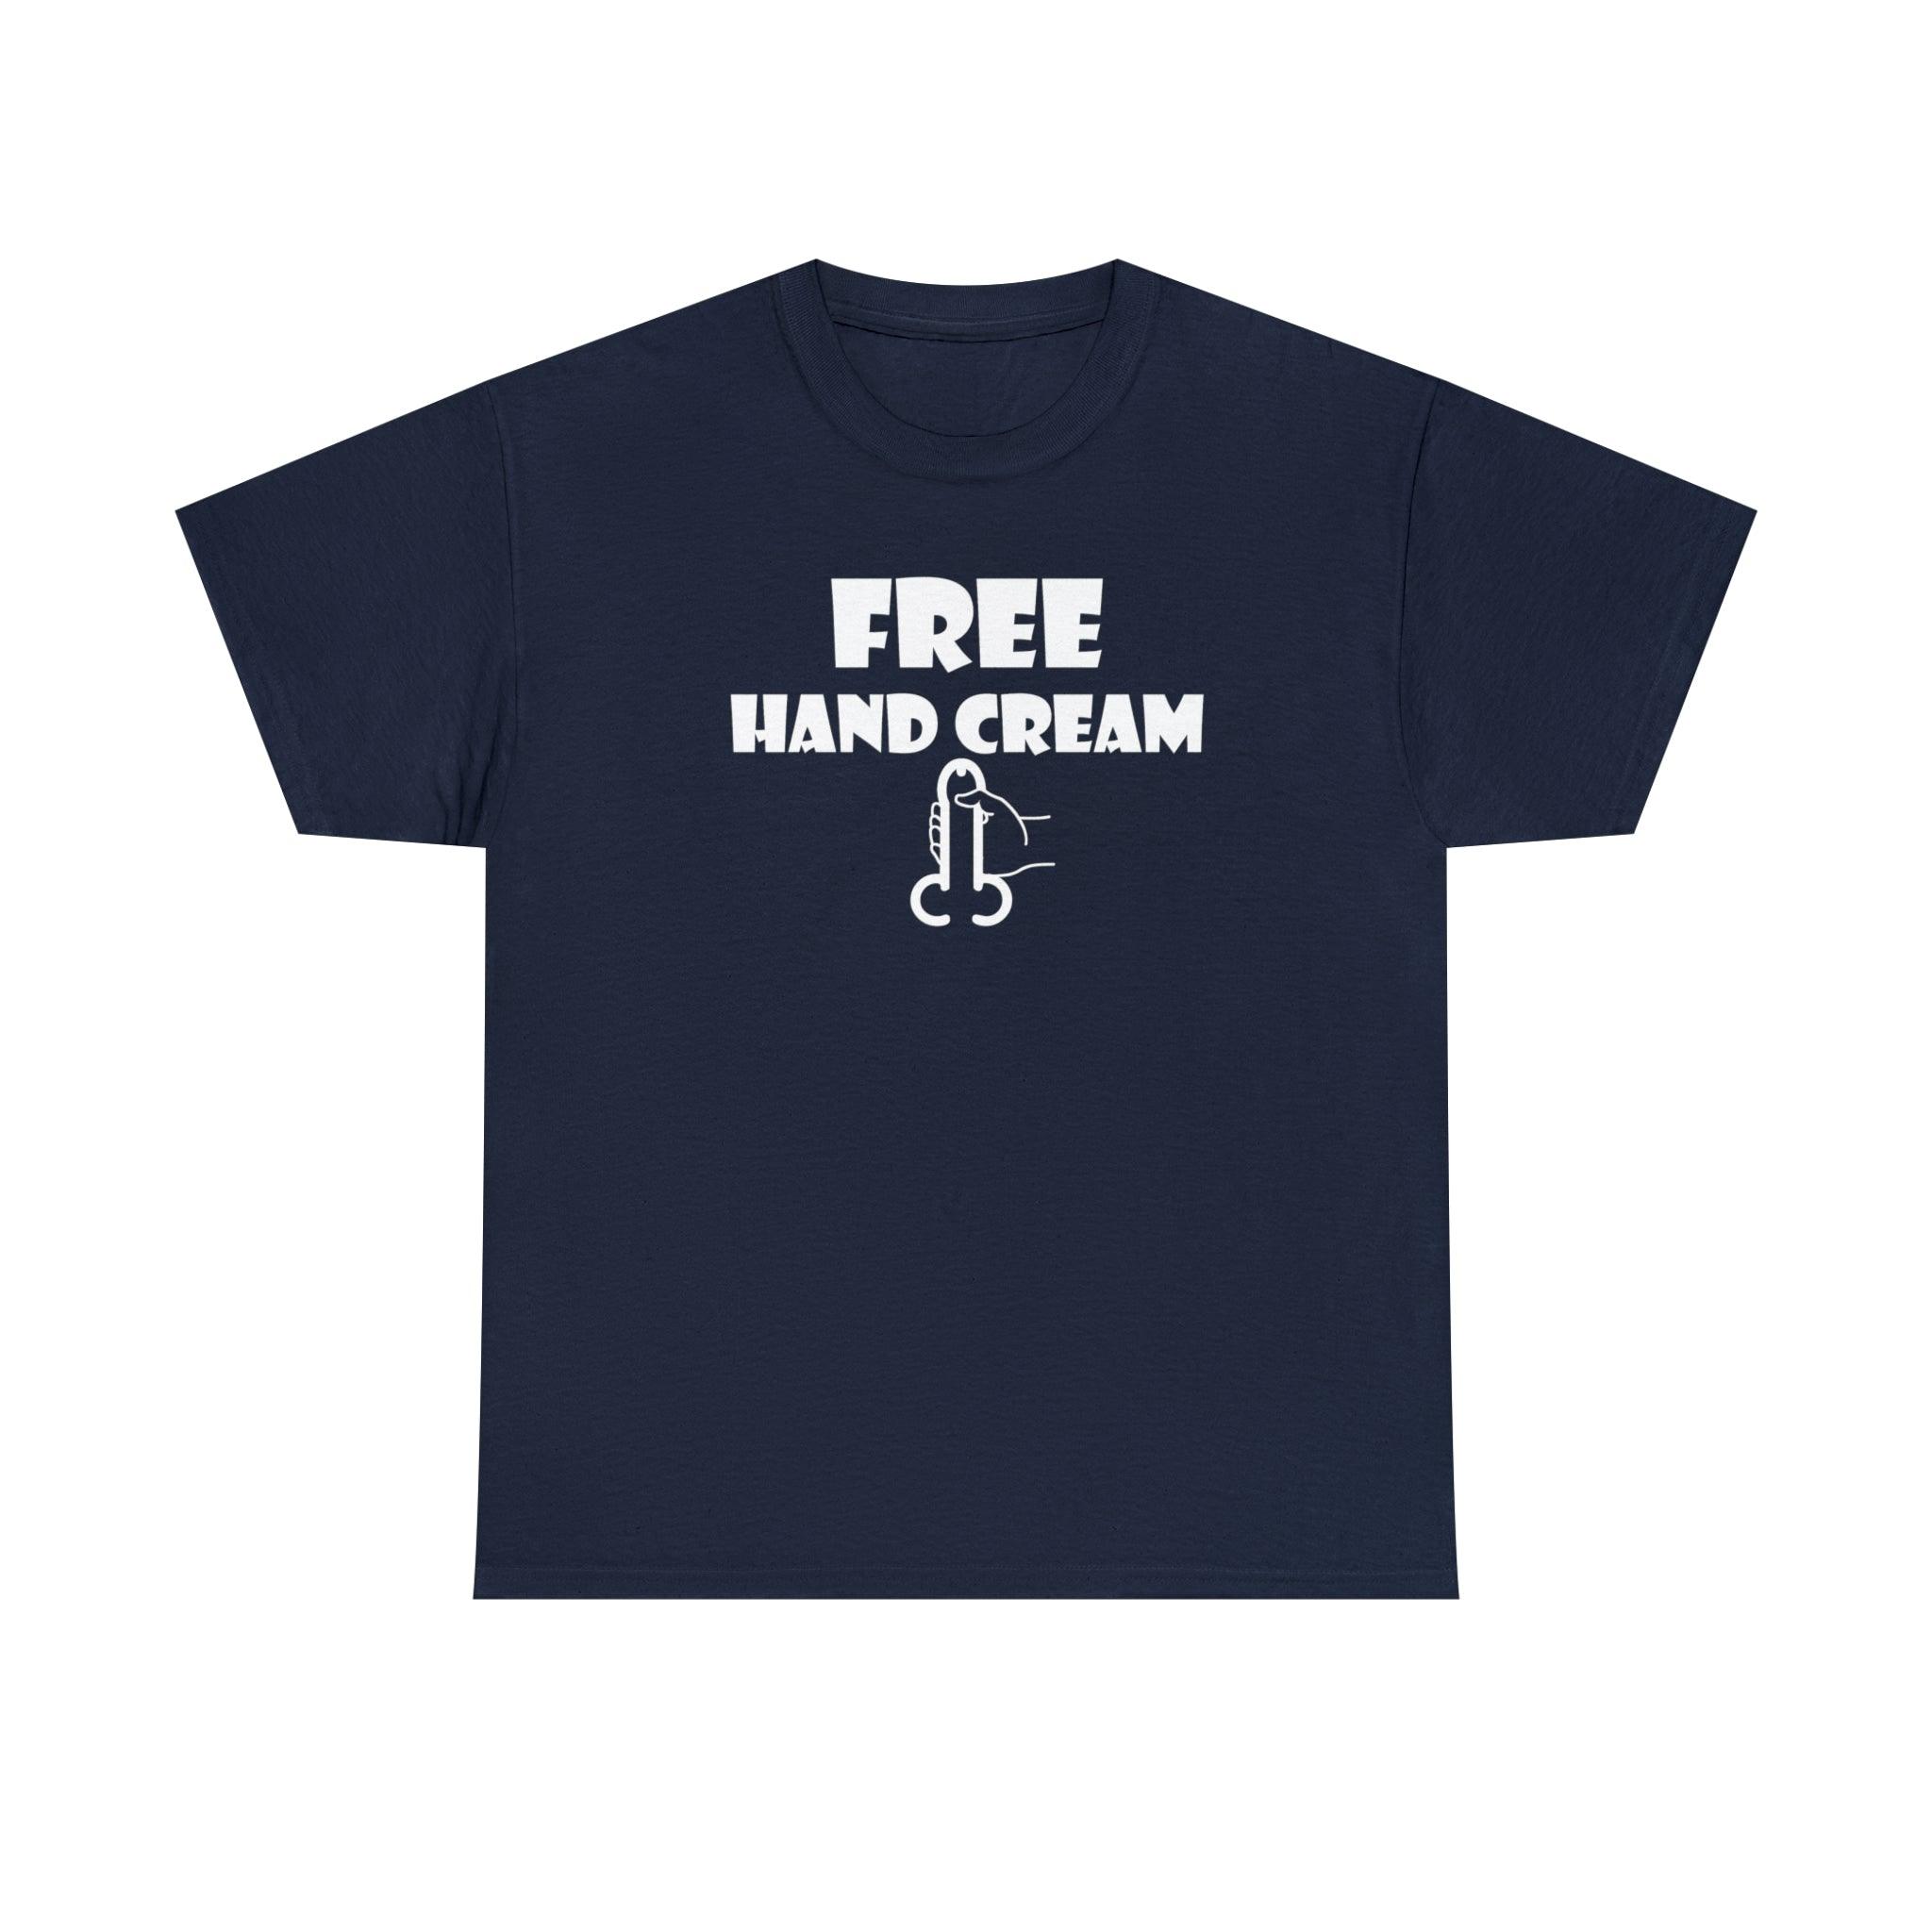 Free Hand Cream funny mens humor t-shirt about masturbation picture